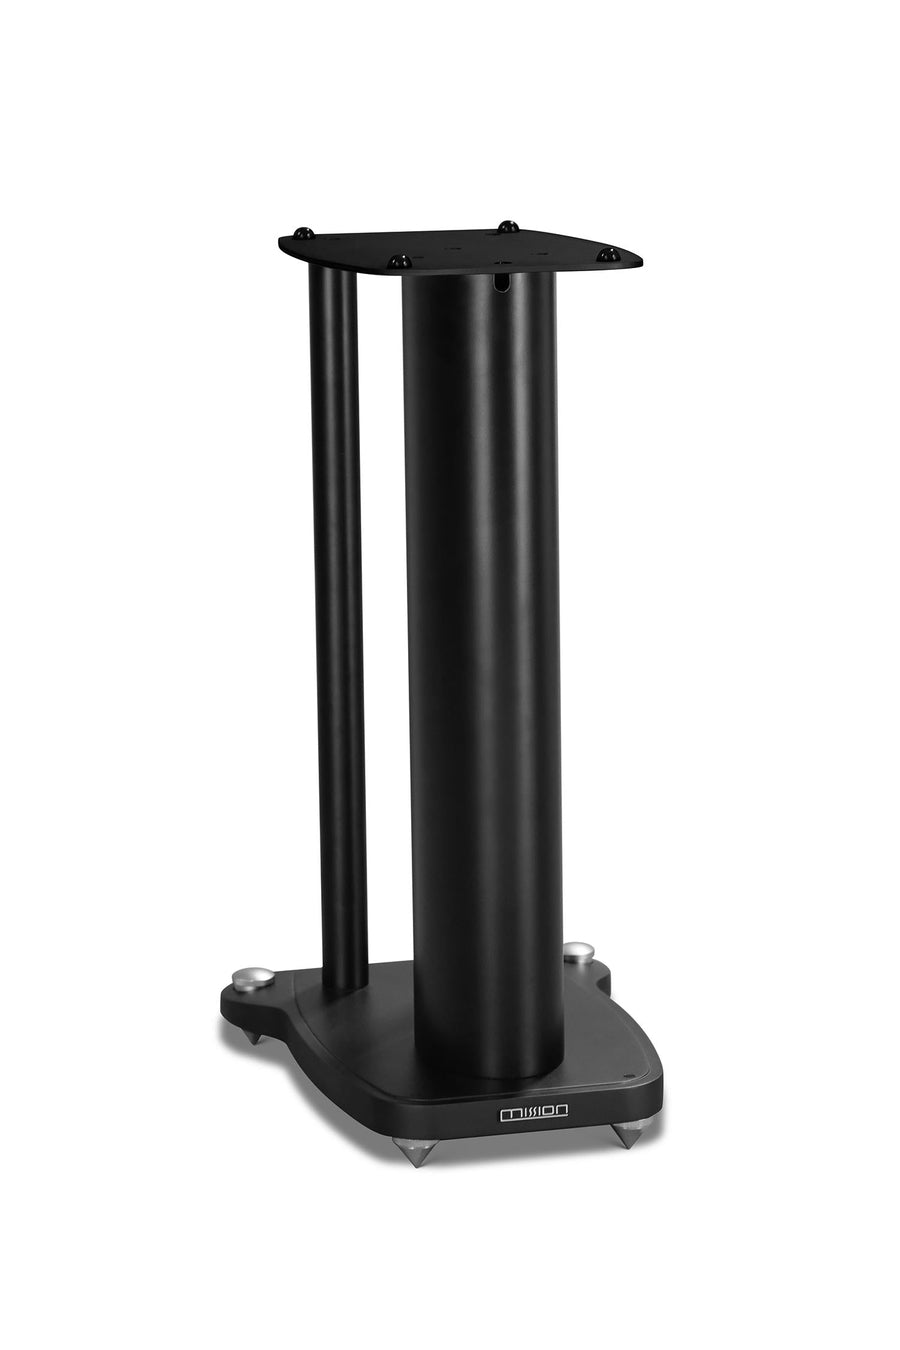 Mission ZX Speaker Stands (Pair)-Black- at Audio Influence